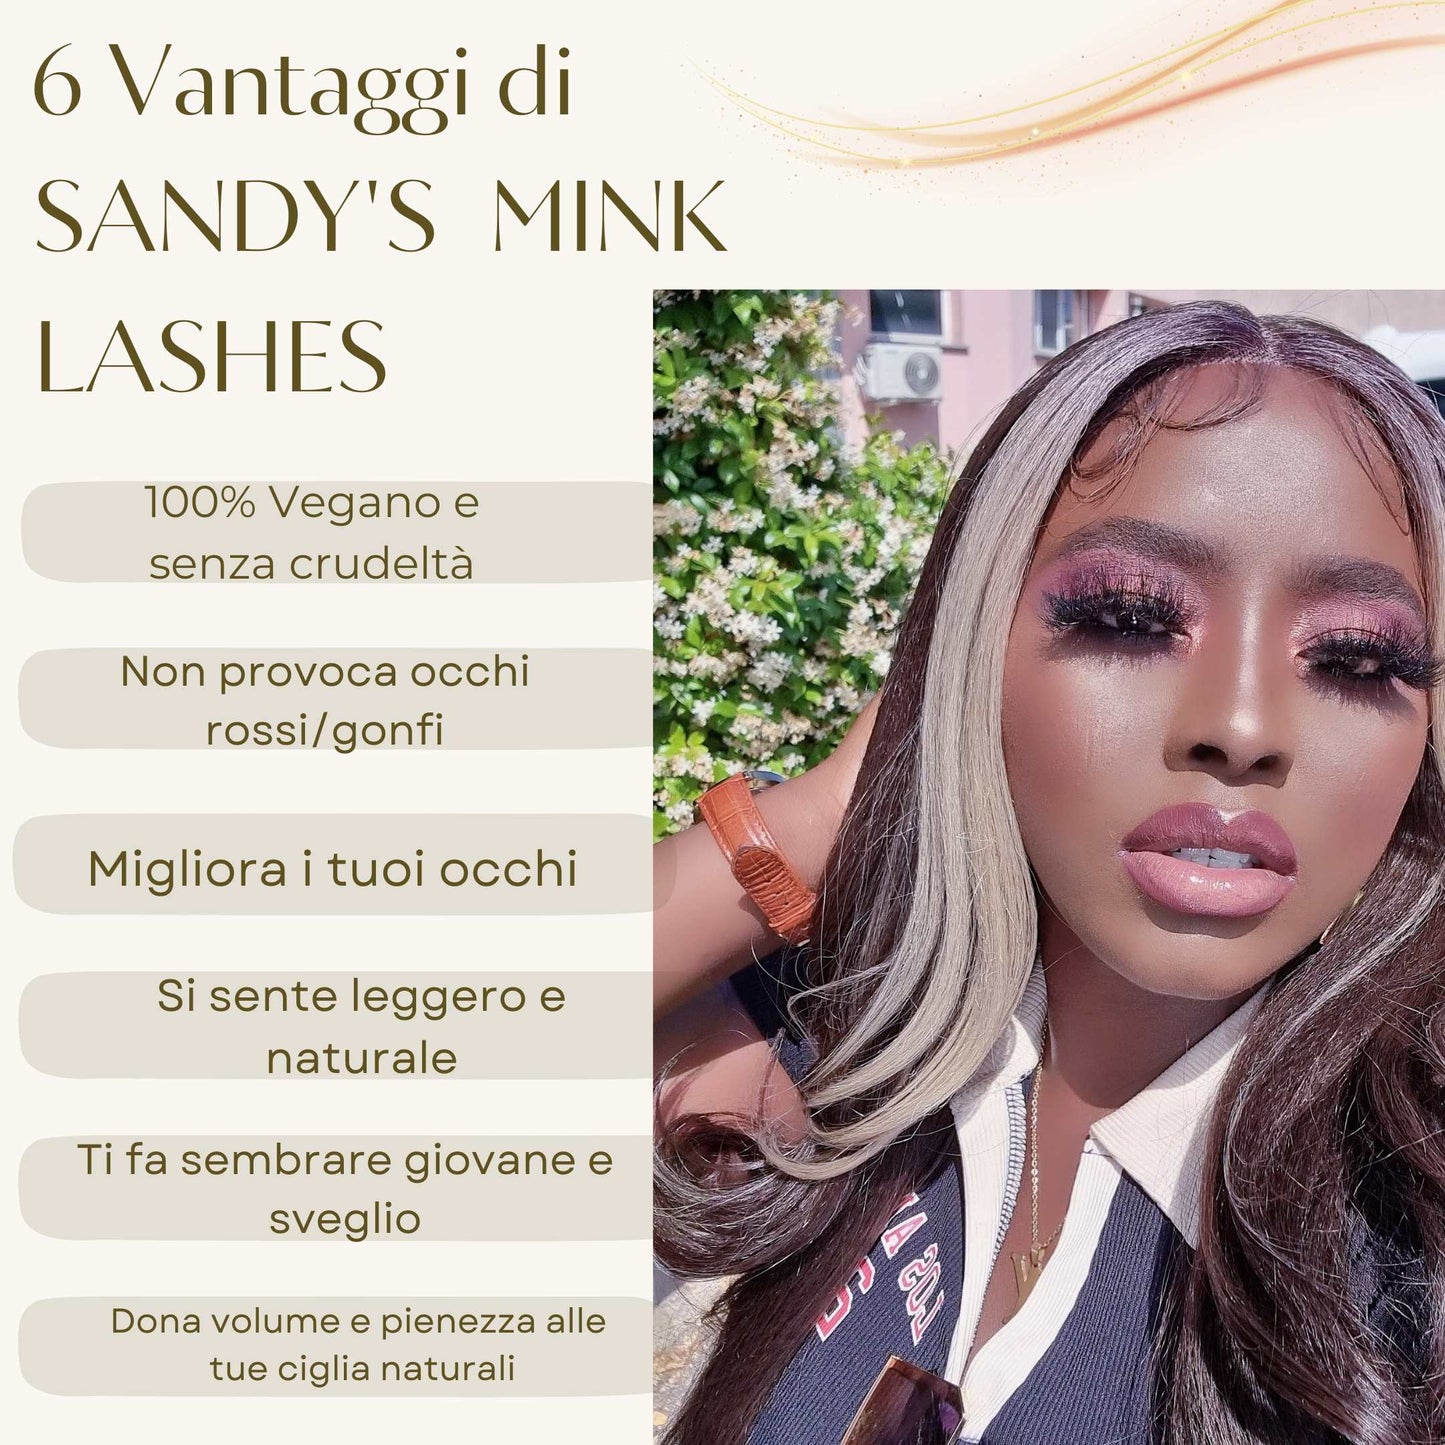 Ciglia finte 5D 3 Paia con Eyeliner Adesivo 25 volte riutilizzabili in Visone 100% Vegano TRIO LASHBOOK 5D 3 Pairs Vegan Dramatic Mink Eyelashes Kit with Eyeliner Glue Russian Volume - SANDY'S MAKEUP AND ARTISTRY 